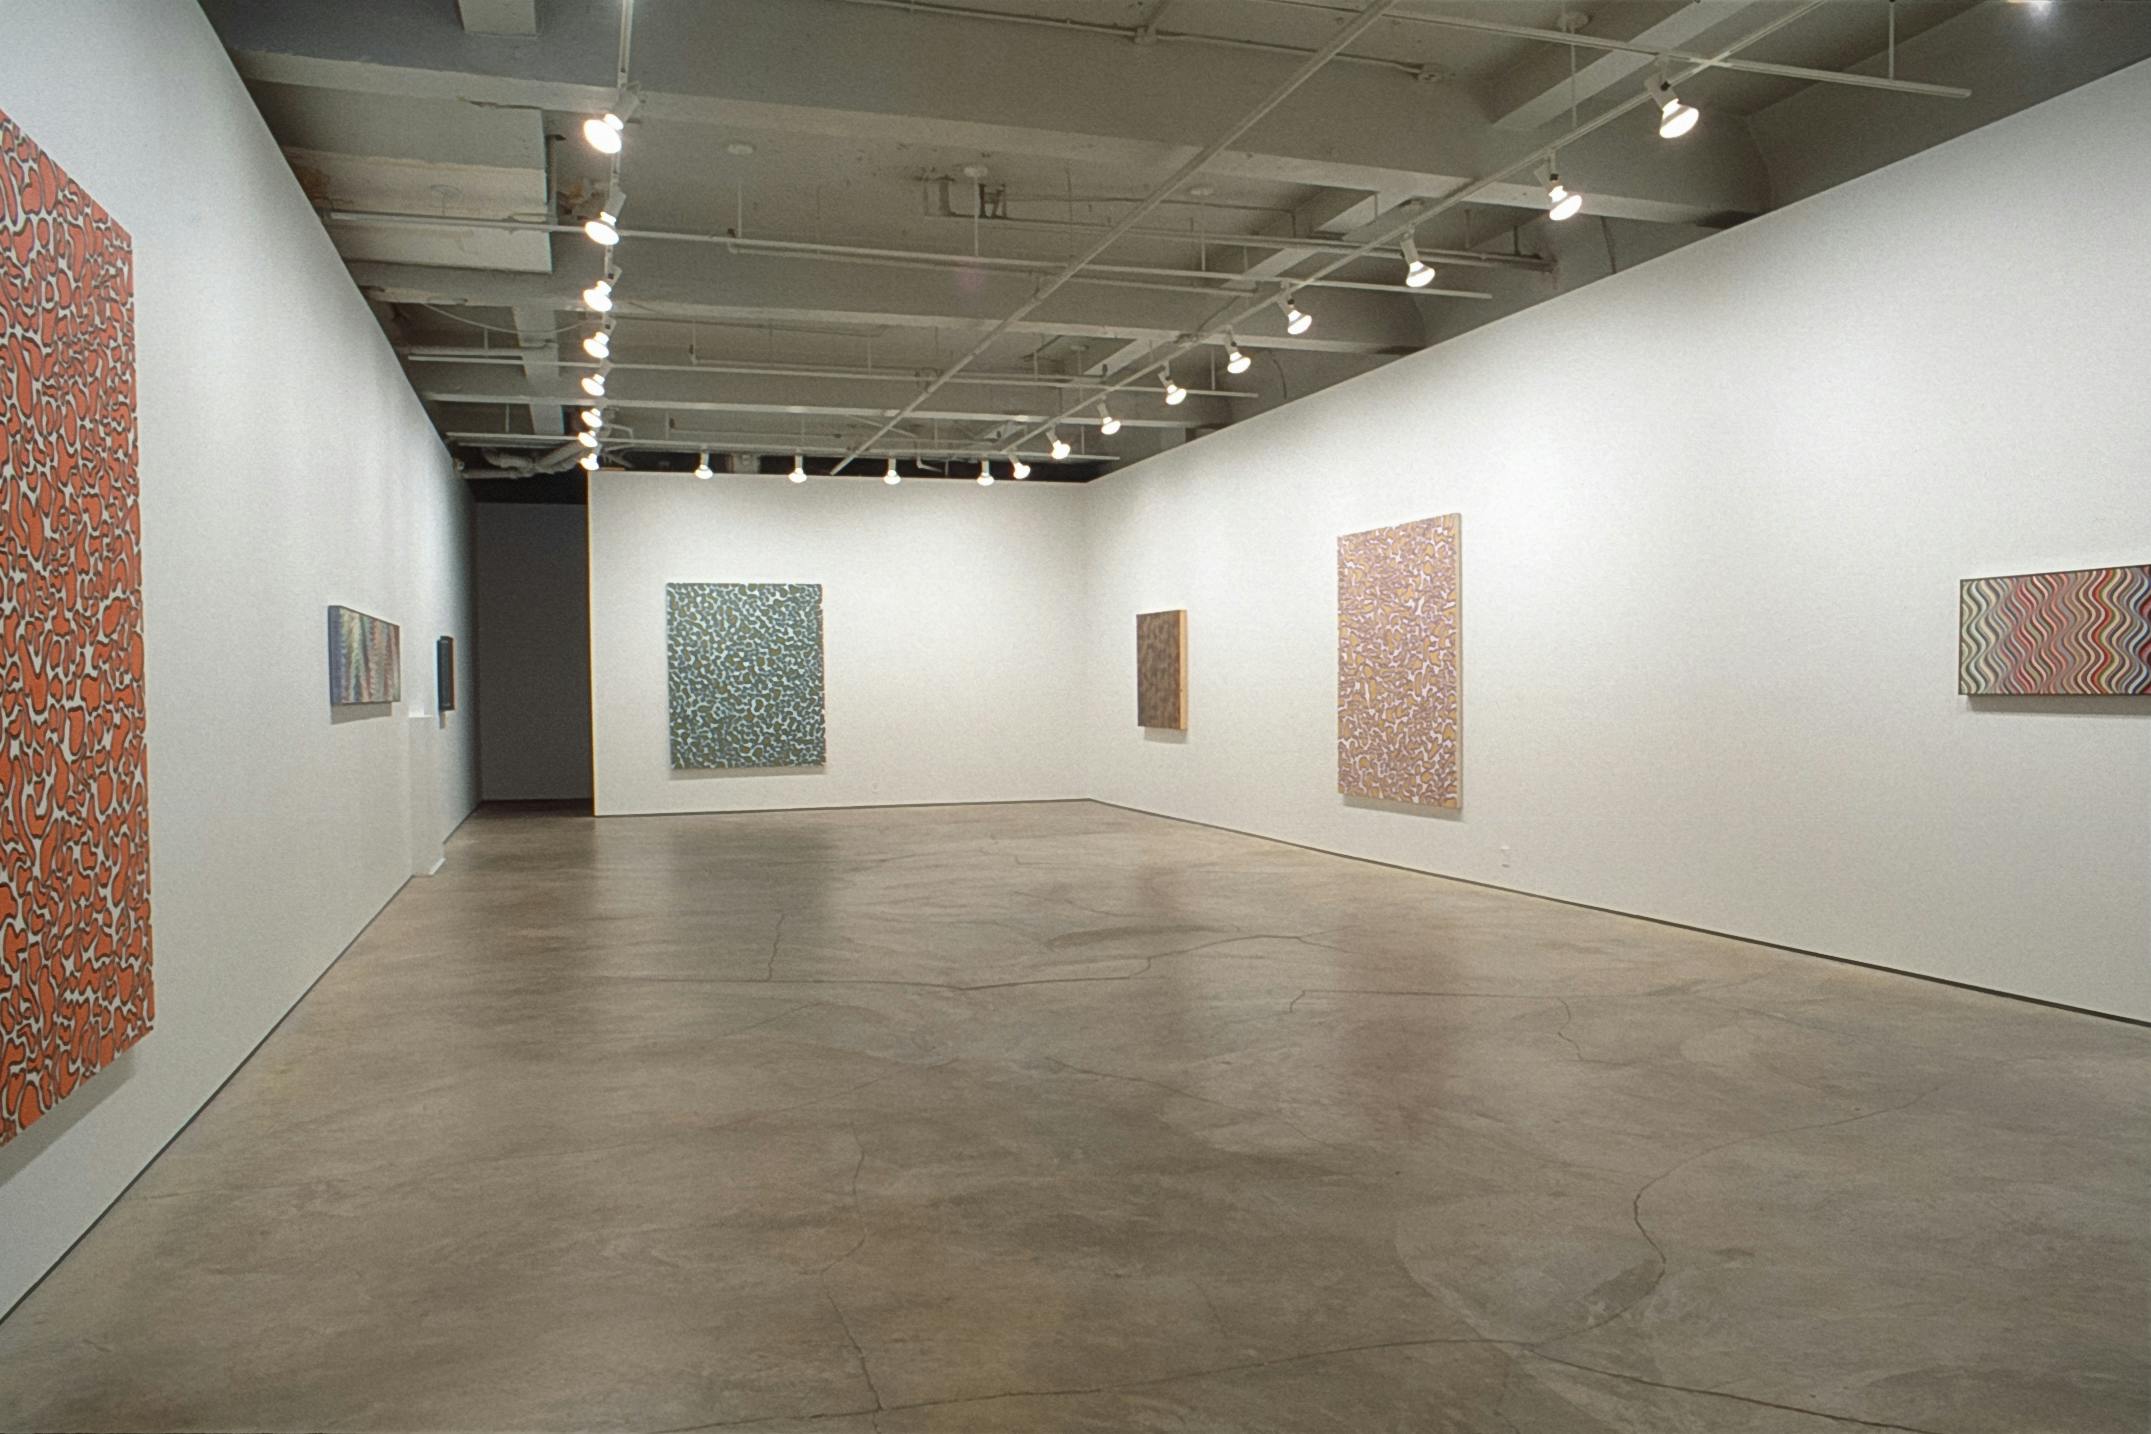 Seven abstract paintings of various sizes are installed on the gallery walls. The entire canvases are filled with colours, shapes, and patterns. There are two similar paintings in different colors.  